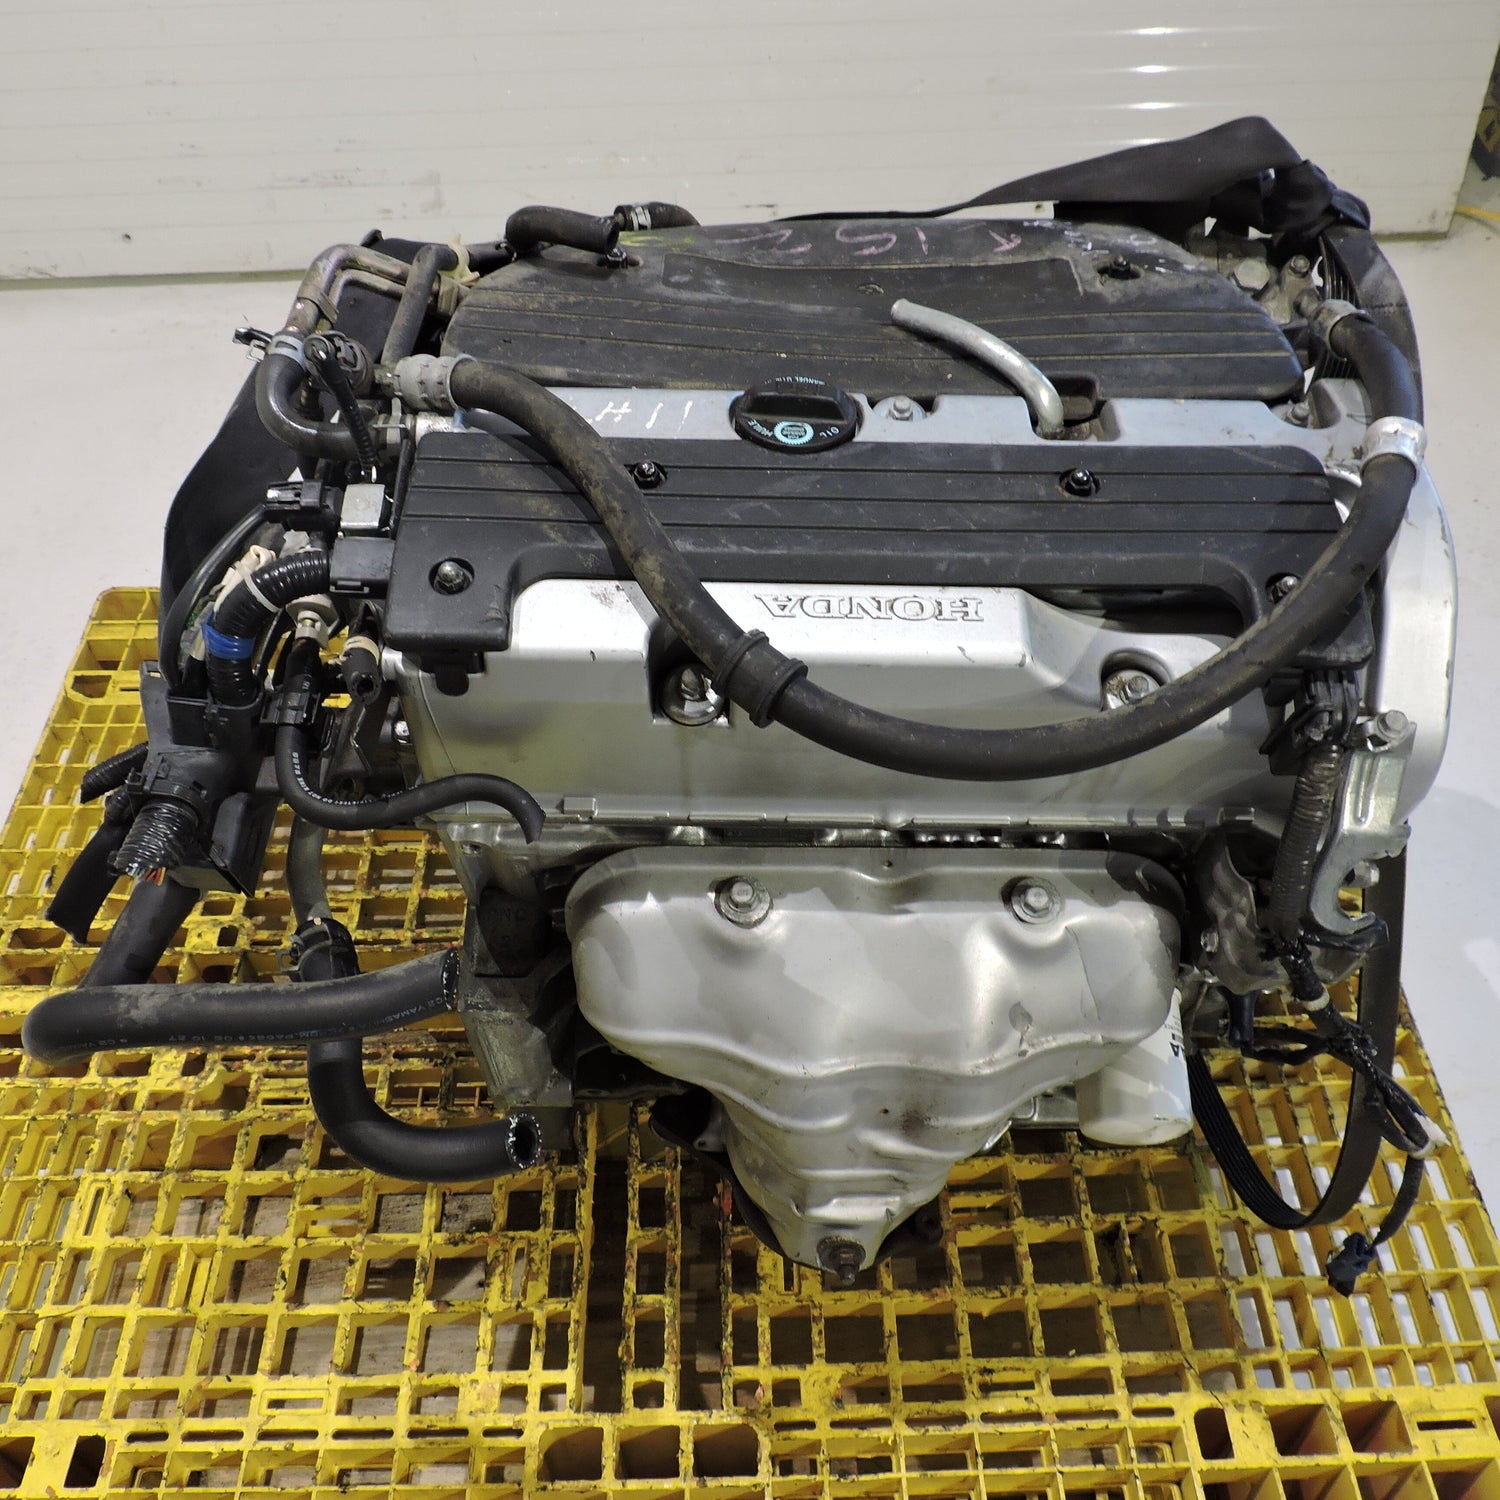 Honda Cr-V 2002-2006 2.0L JDM Replacement Engine For 2.4L - K20a